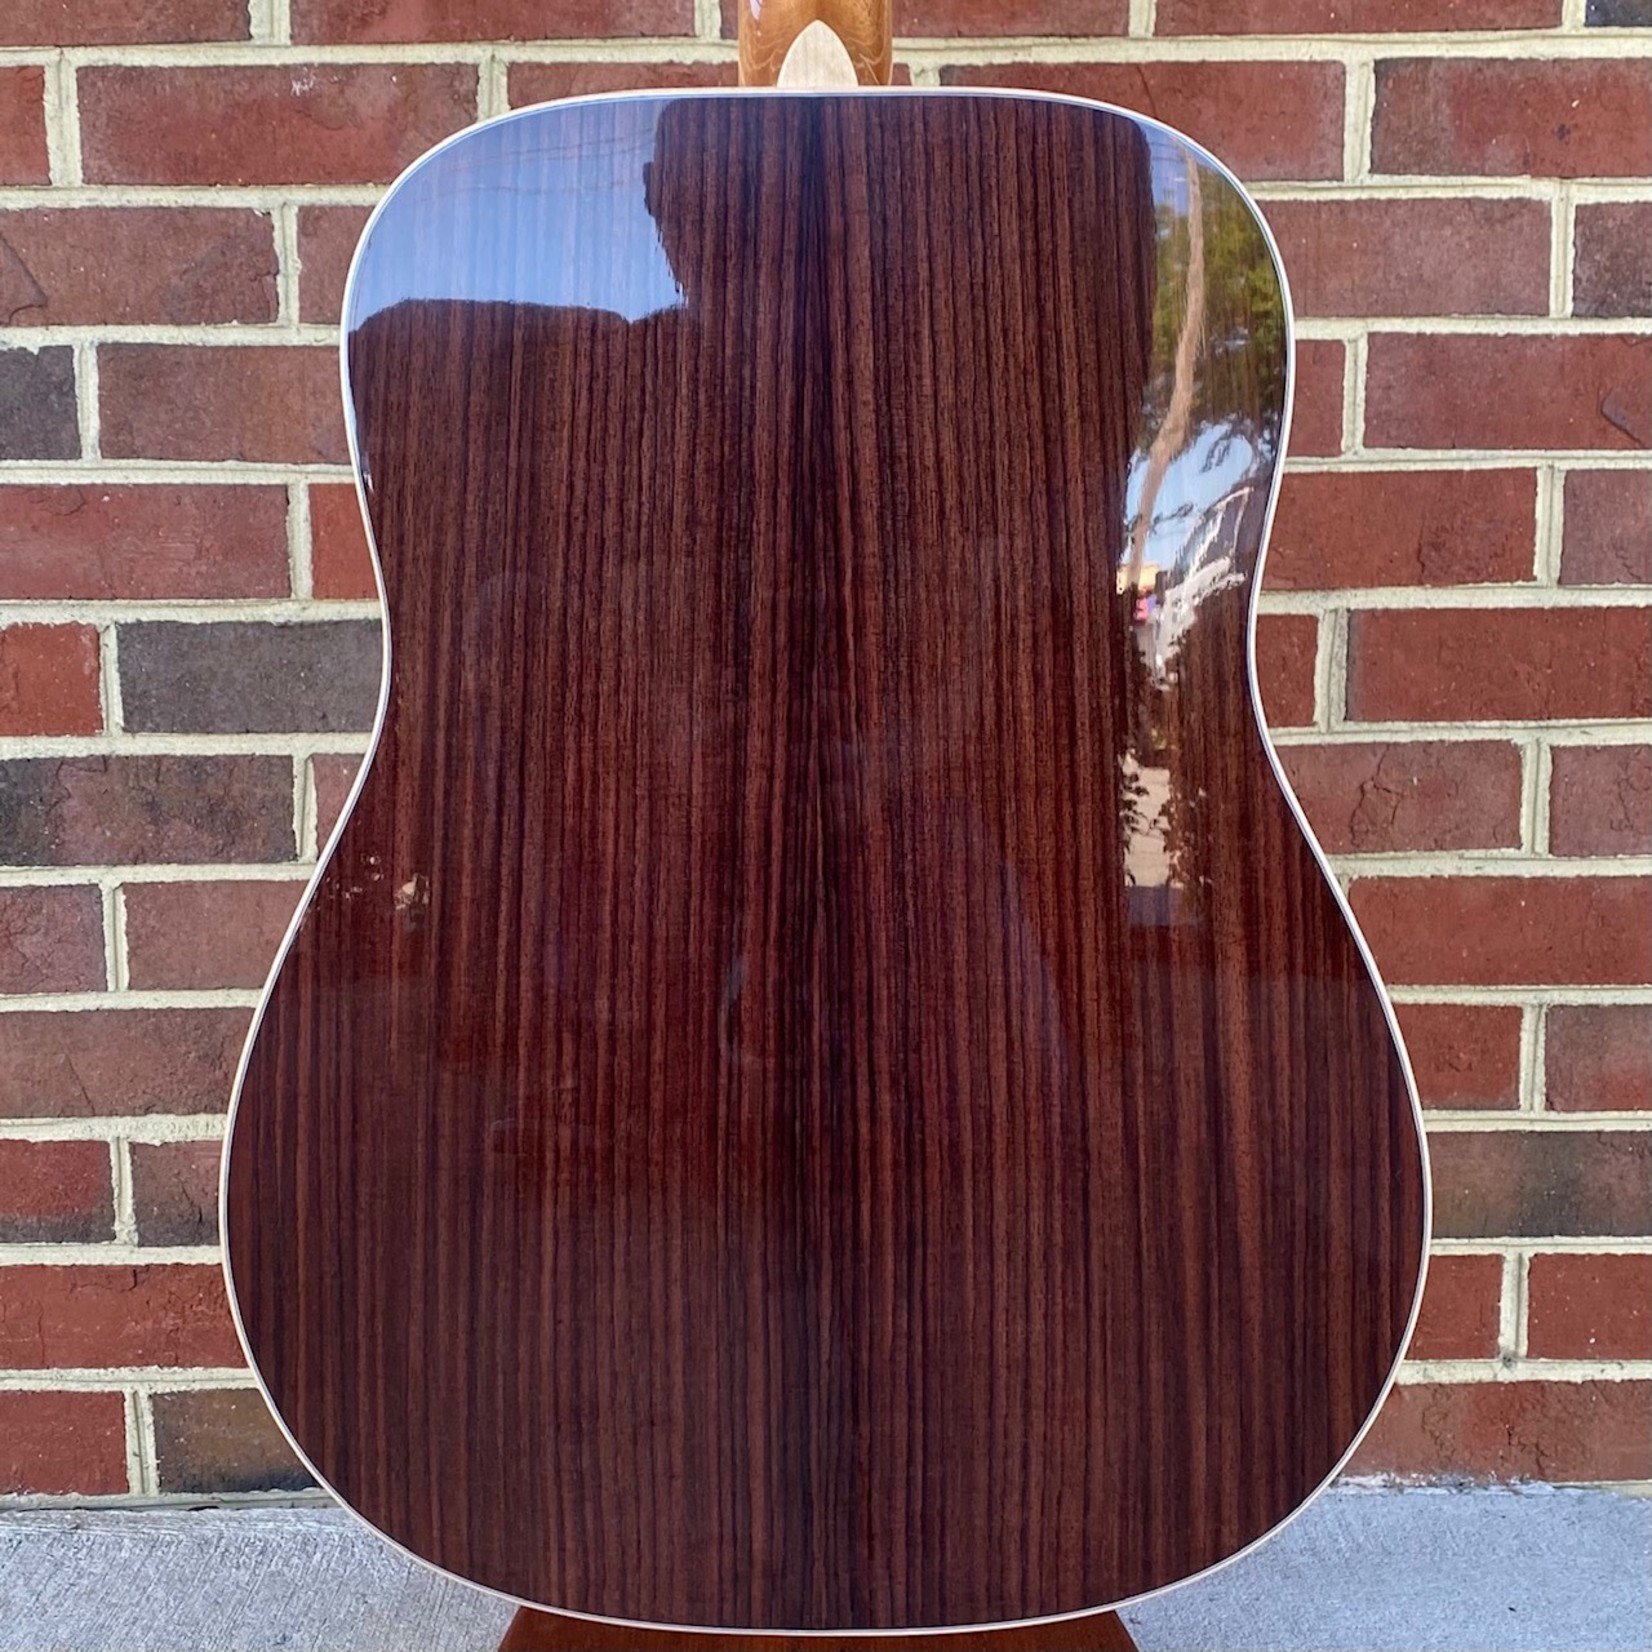 Larrivee Larrivee D-44RW, Indian Rosewood Back and Sides, Sitka Spruce Top, All Gloss, LR Baggs Anthem No Cut Electronics, Hardshell Case